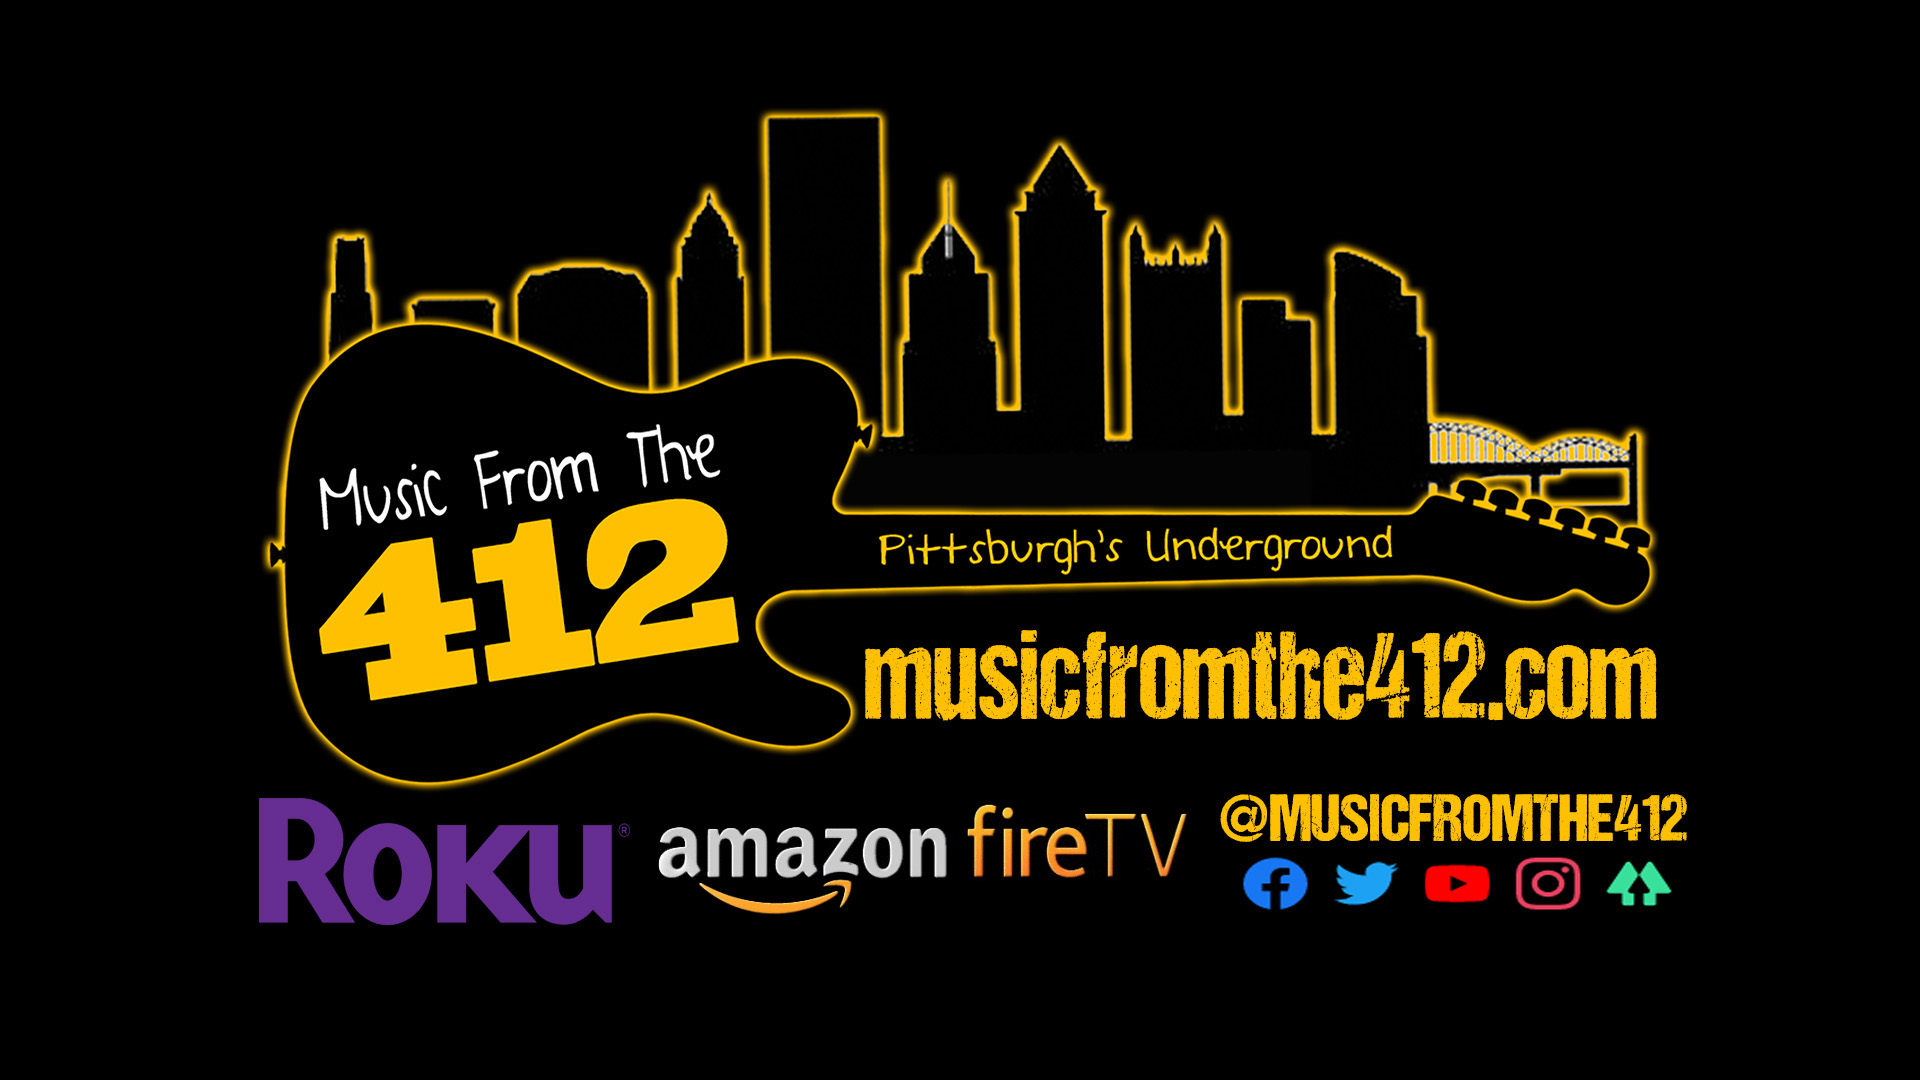 Music from the 412